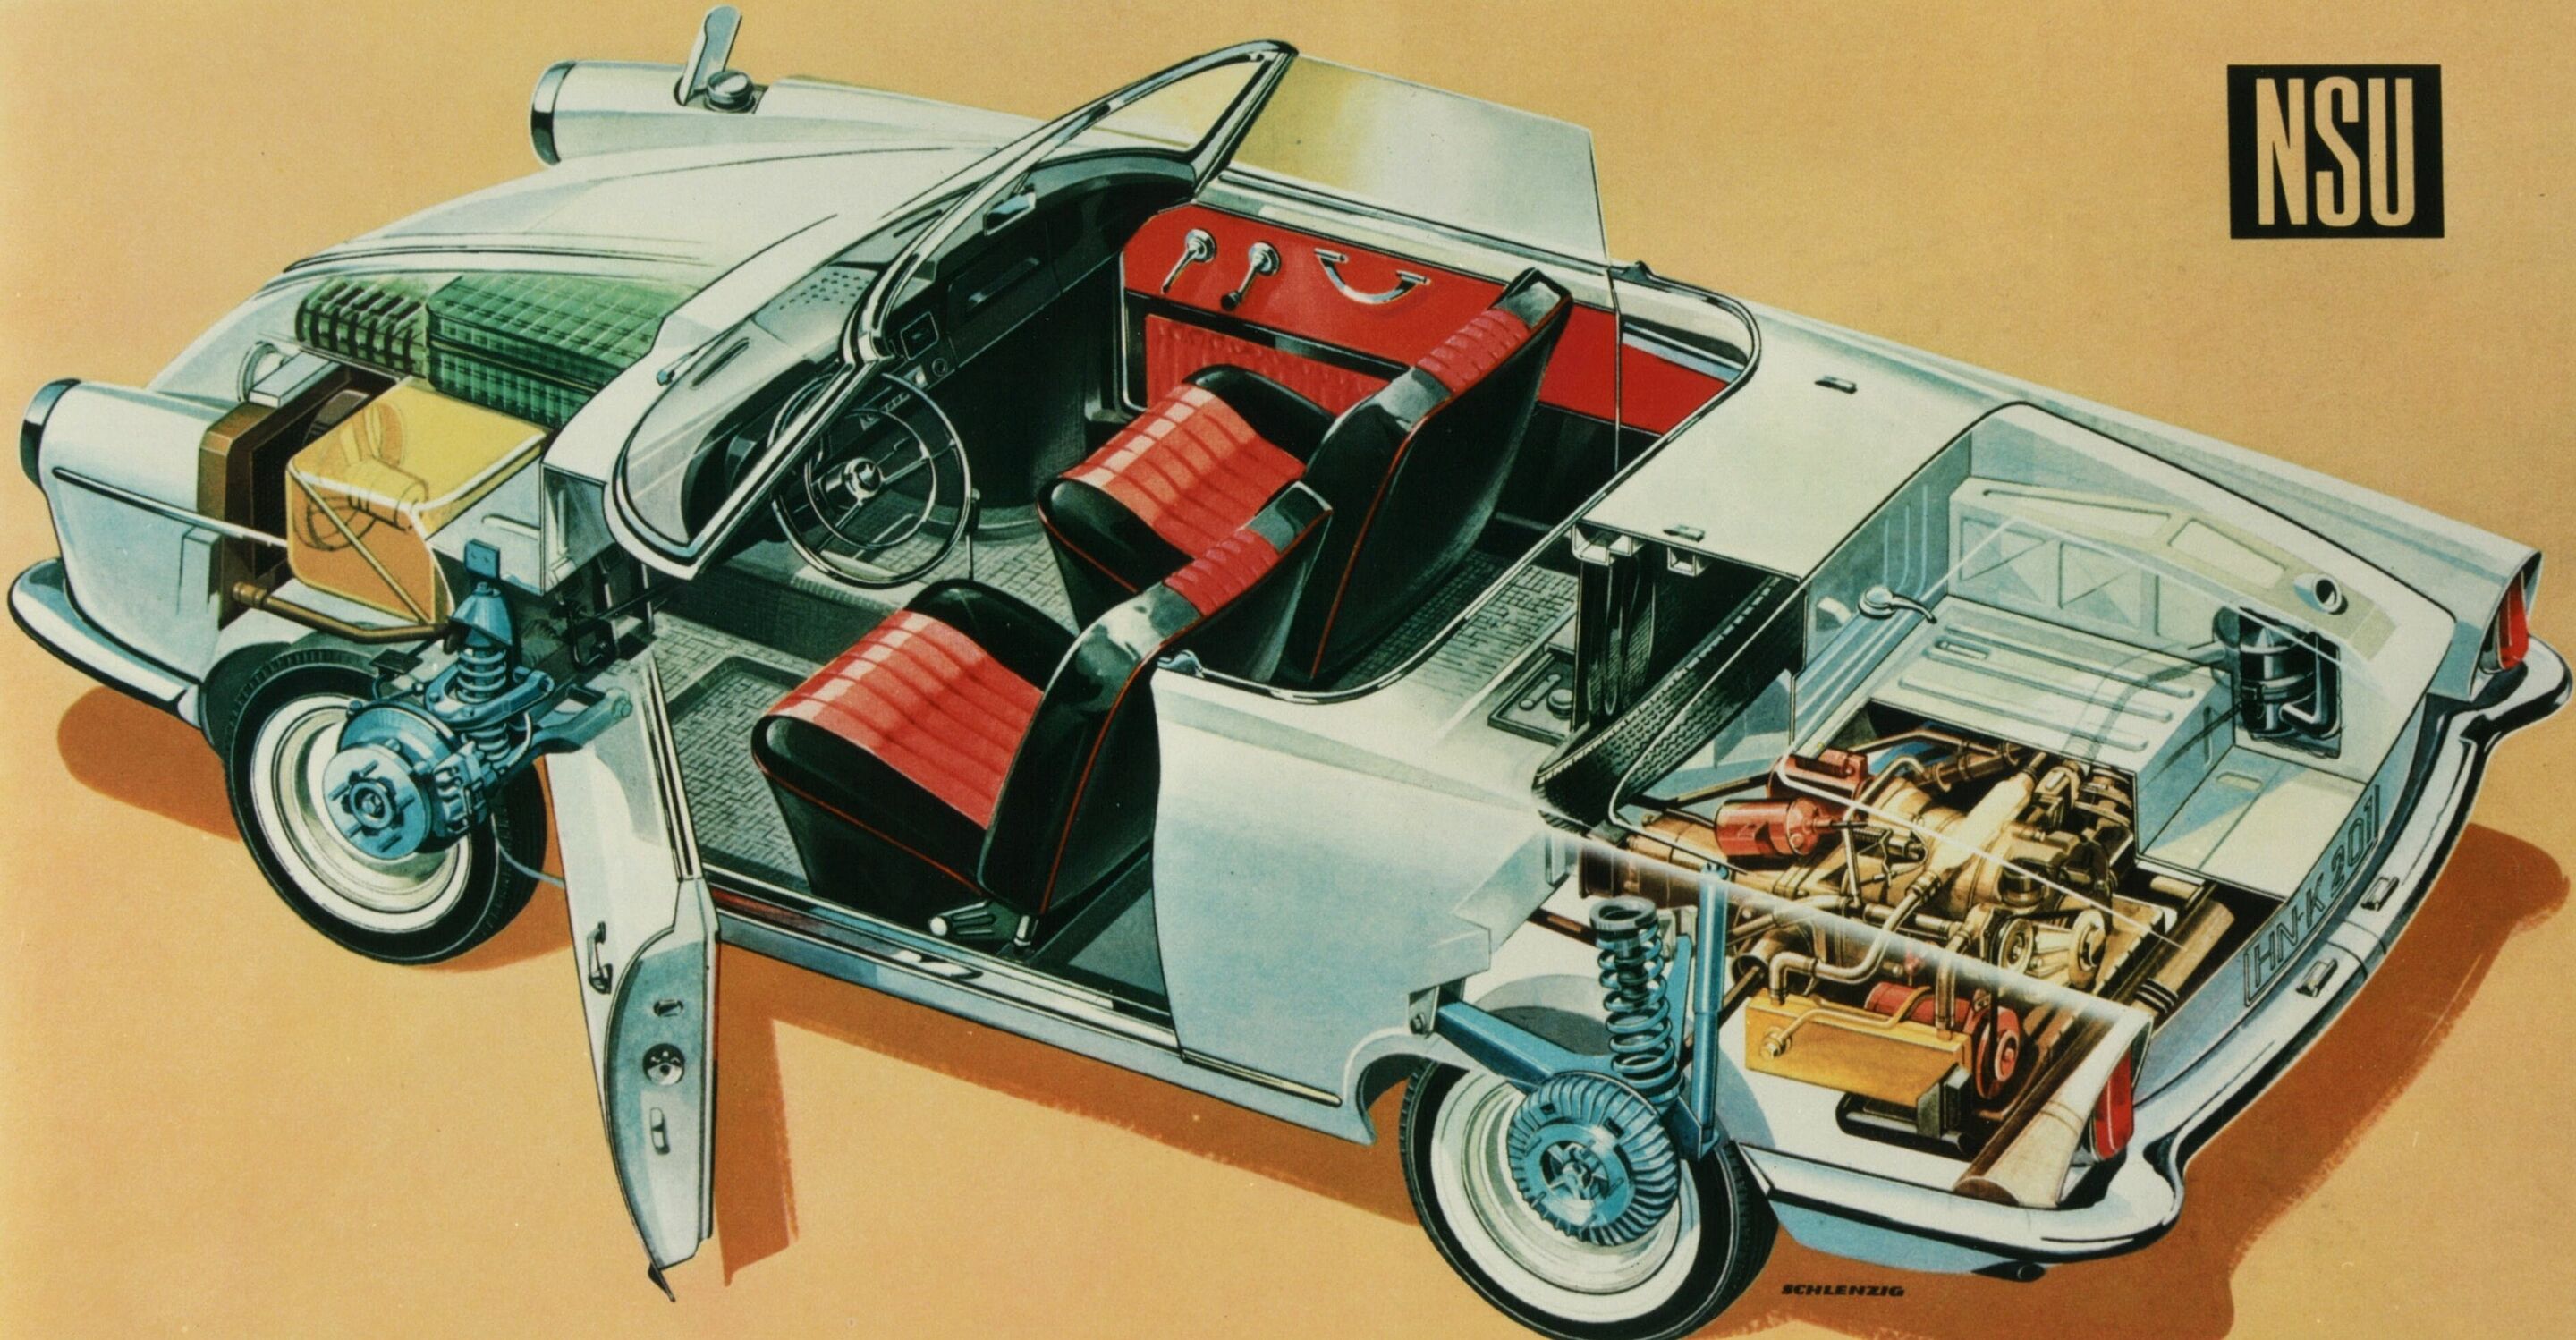 Sporty, beautiful, and innovative: the NSU/Wankel Spider